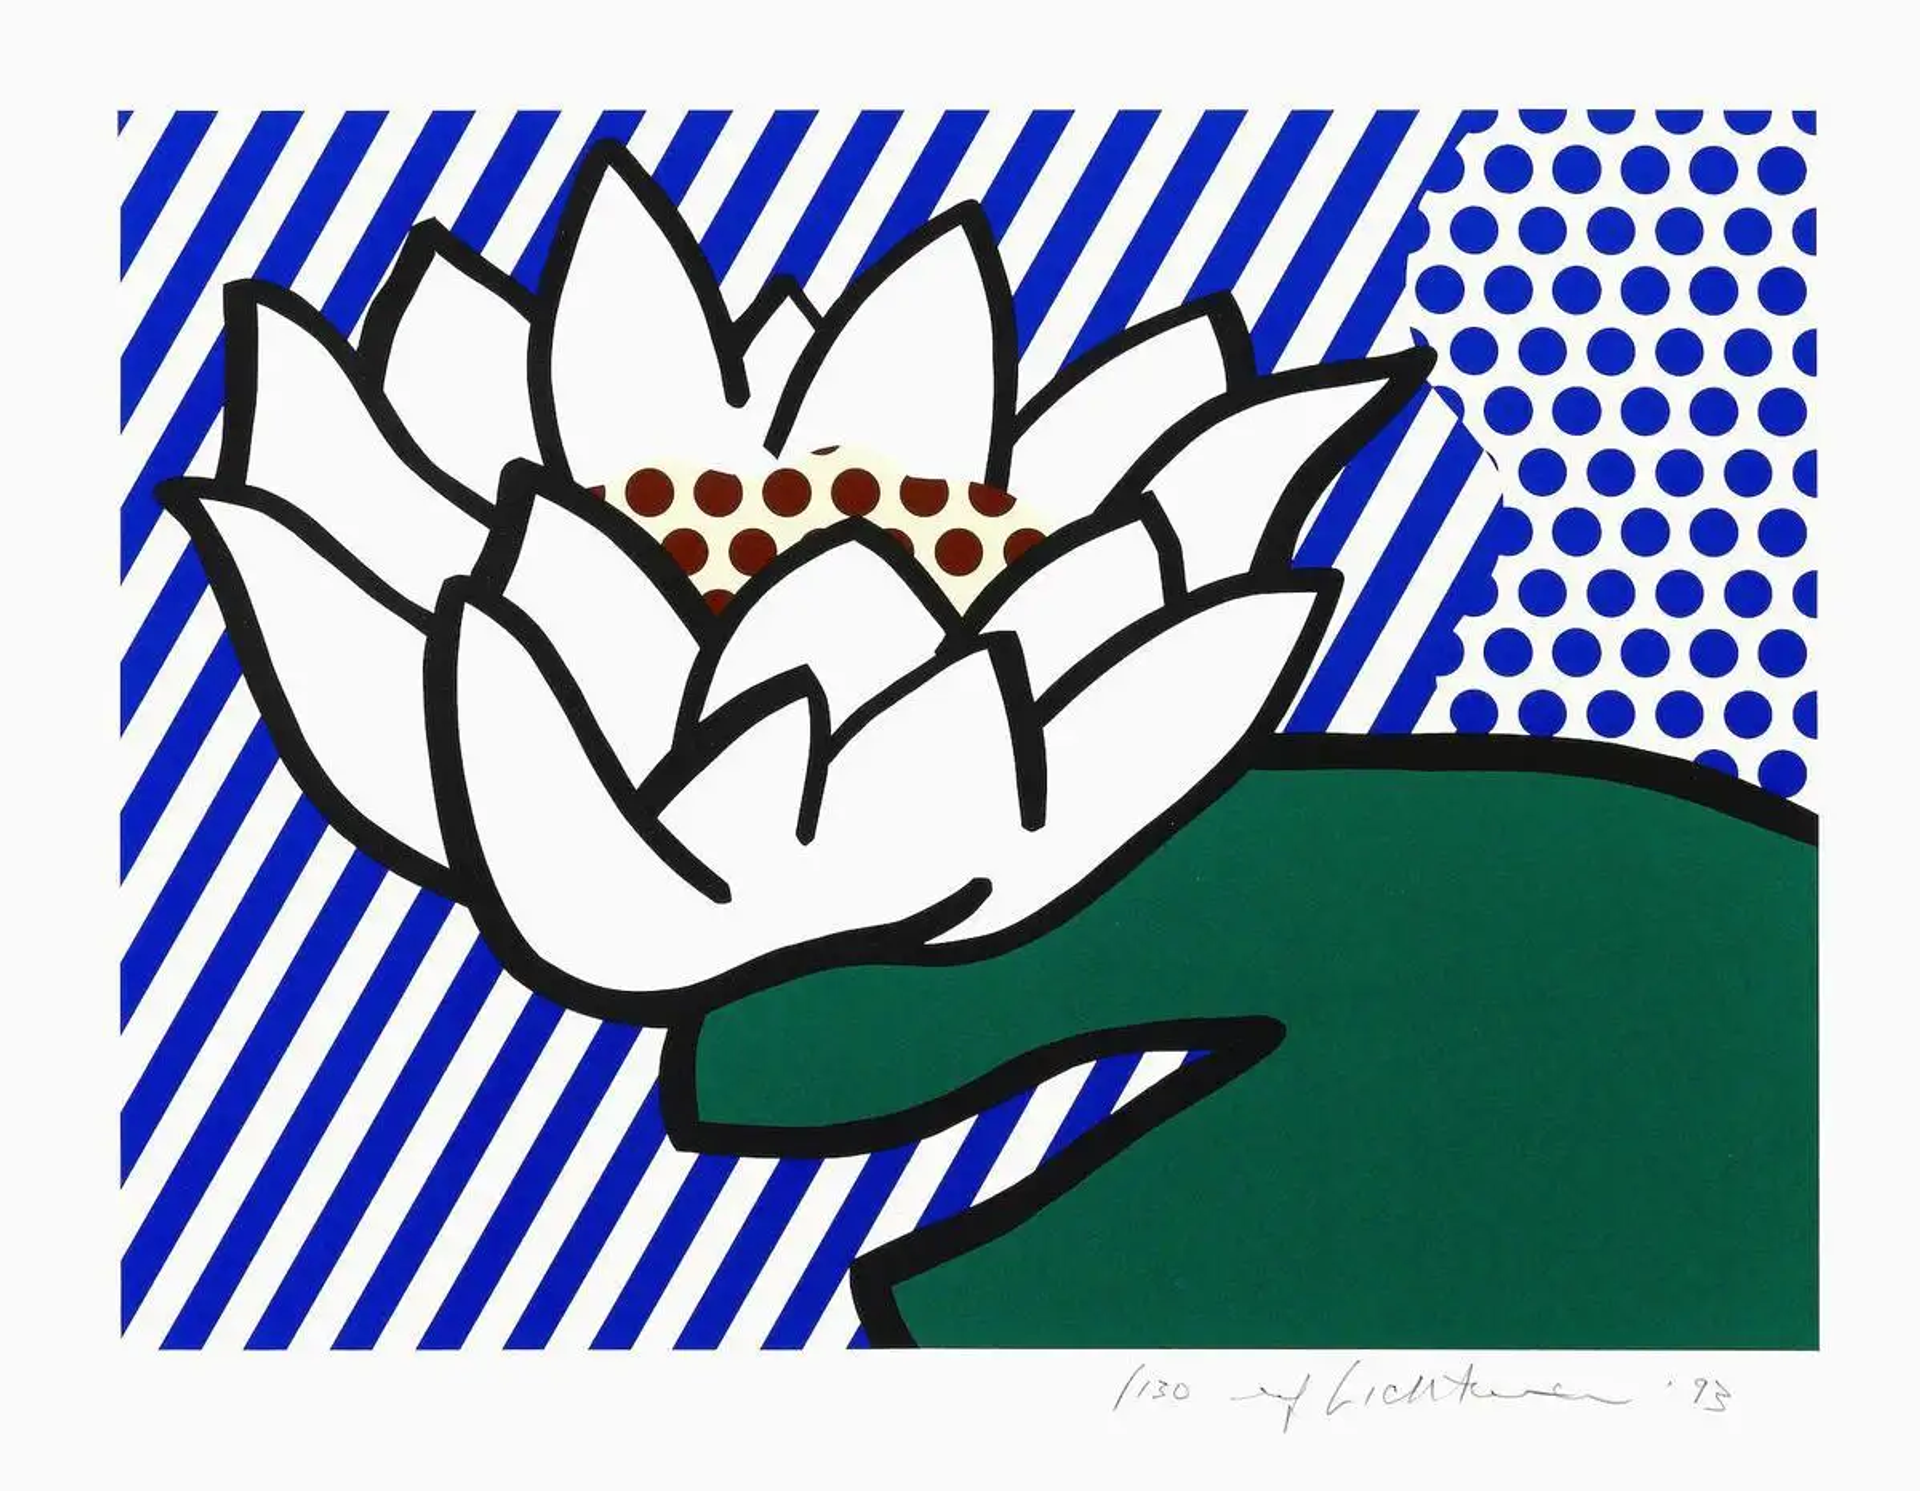 An image of one of Lichtenstein's reinterpretations of a Water Lily, shown in thick lines against a patterned blue background.